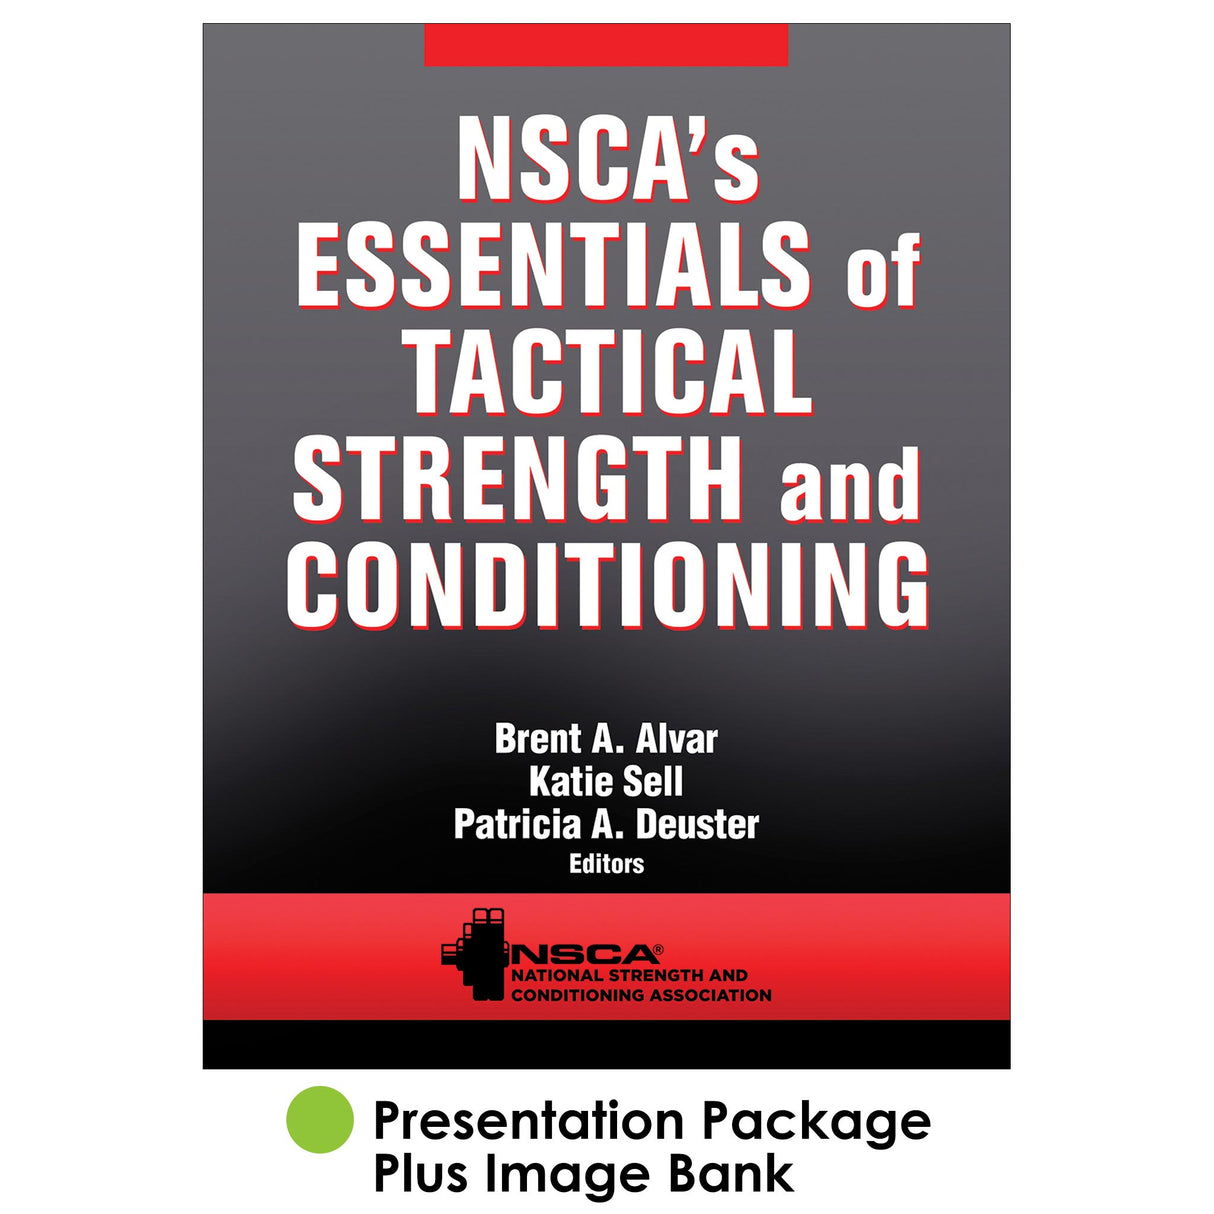 NSCA's Essentials of Tactical Strength and Conditioning HKPropel Presentation
Package plus Image Bank